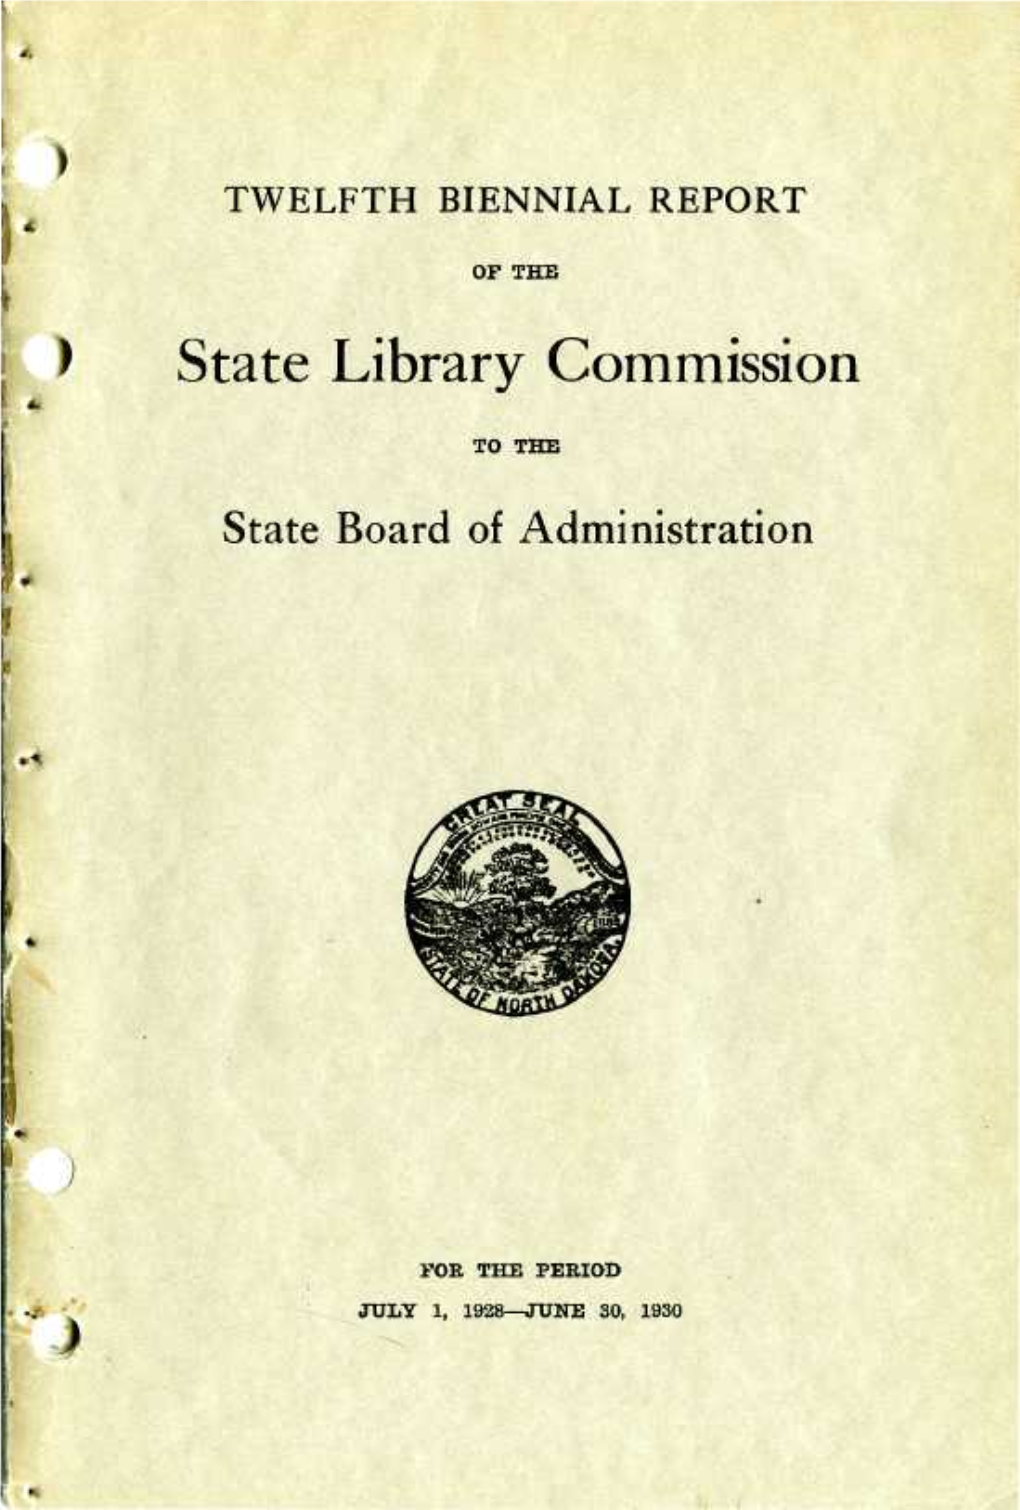 ) State Library Commission